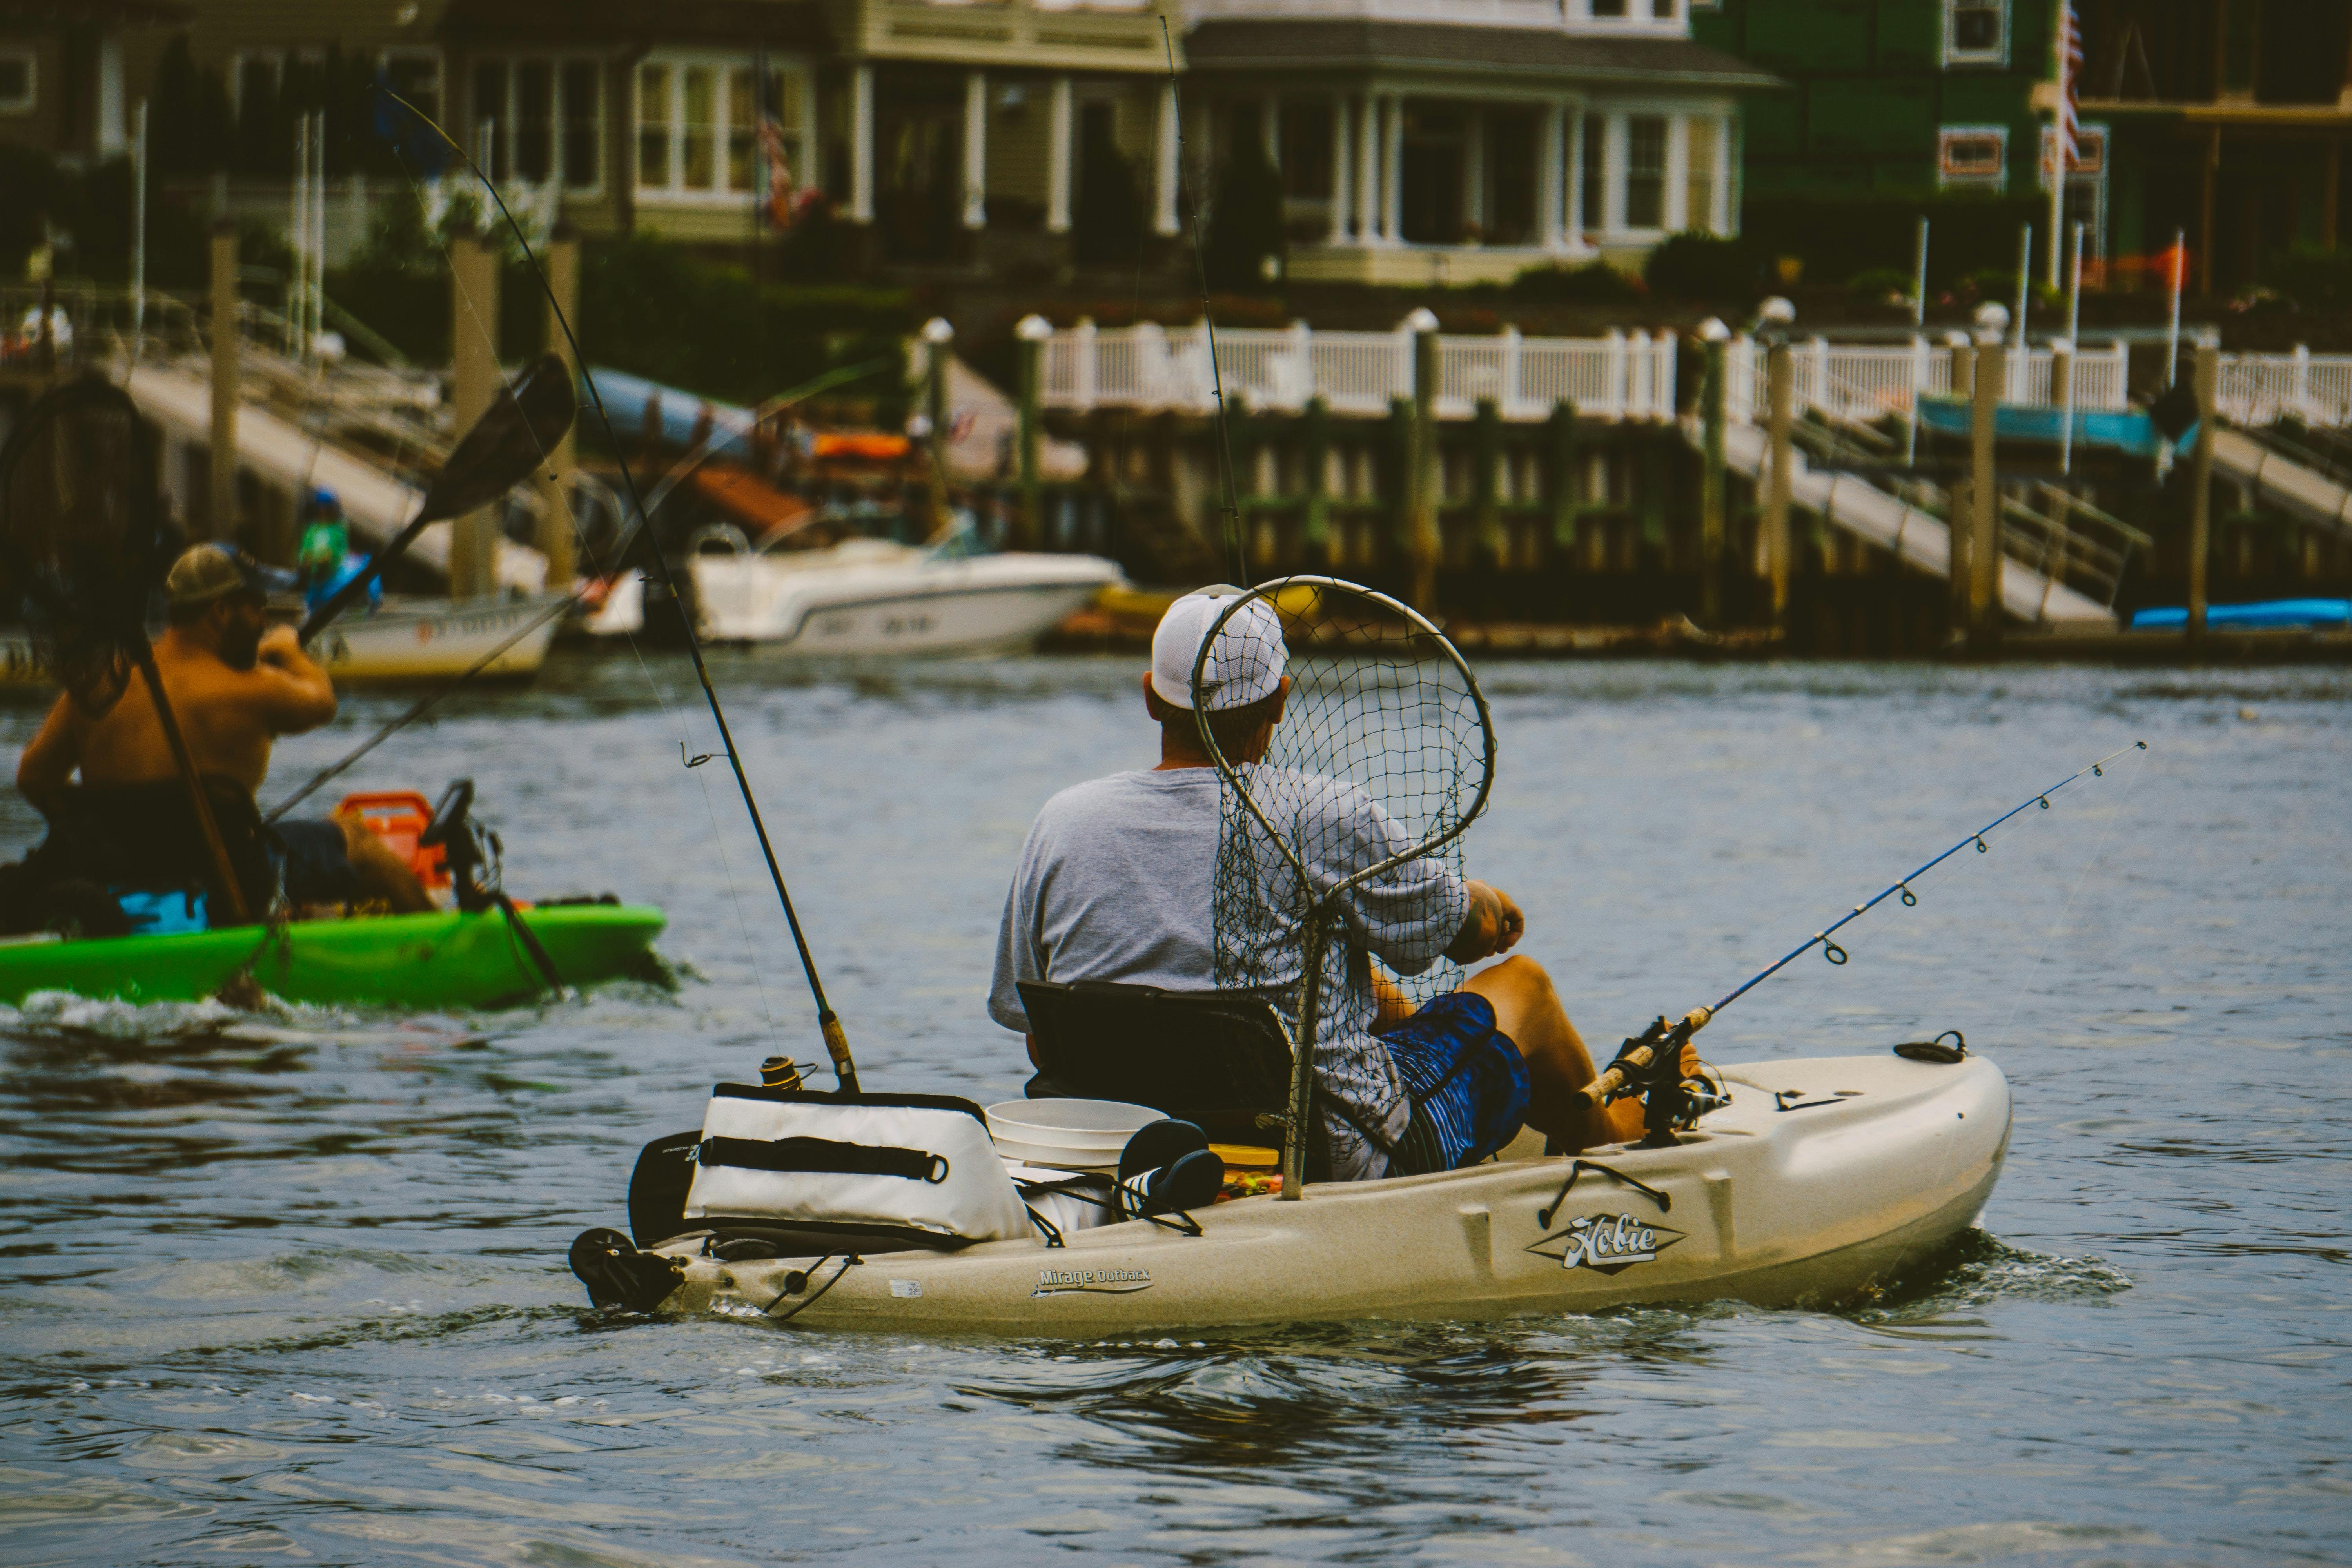 A man kayaks low to the water with a cooler, net, bucket, and fishing rod all visible from the boat.